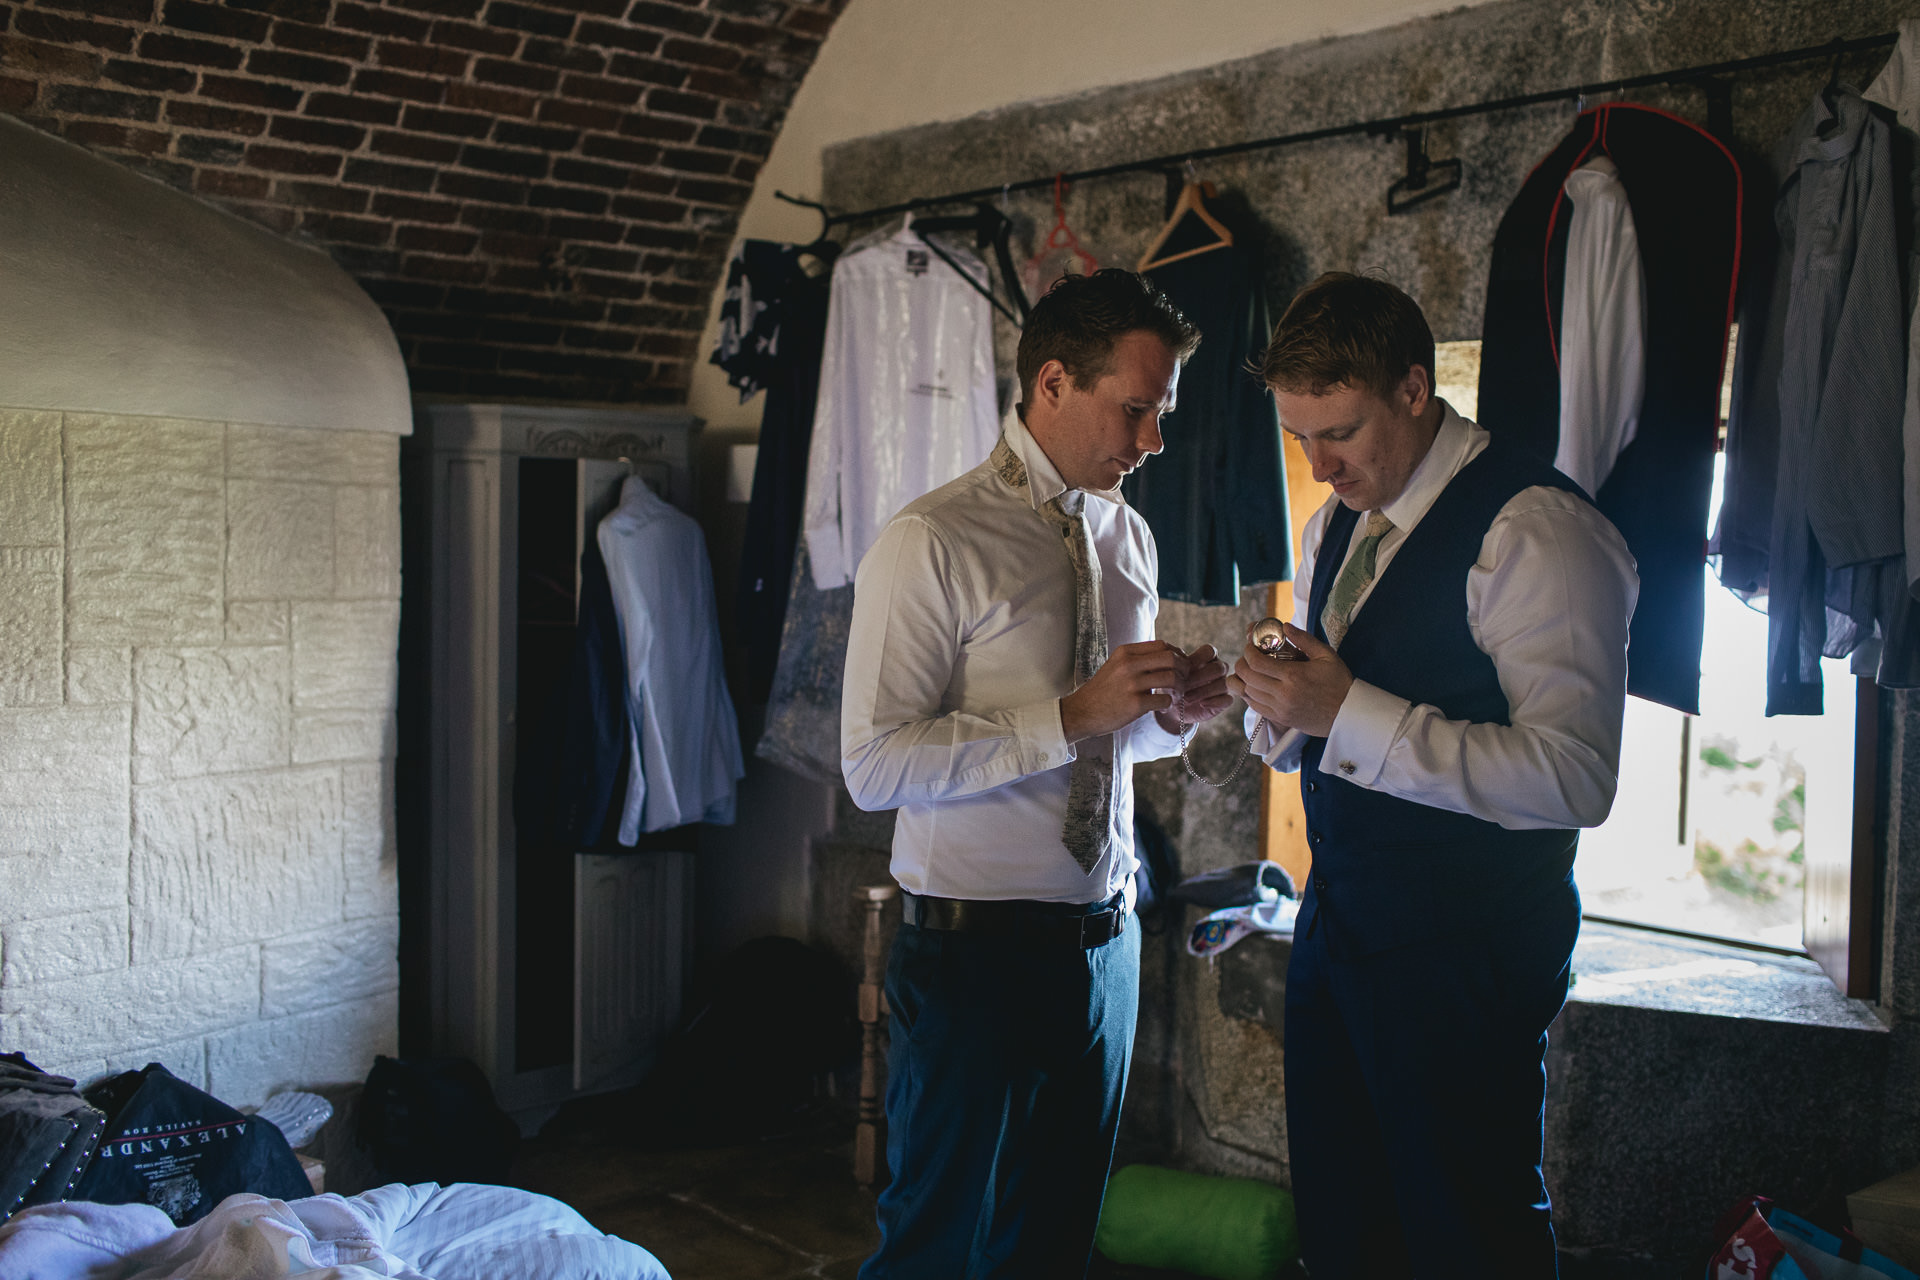 Two men getting dressed